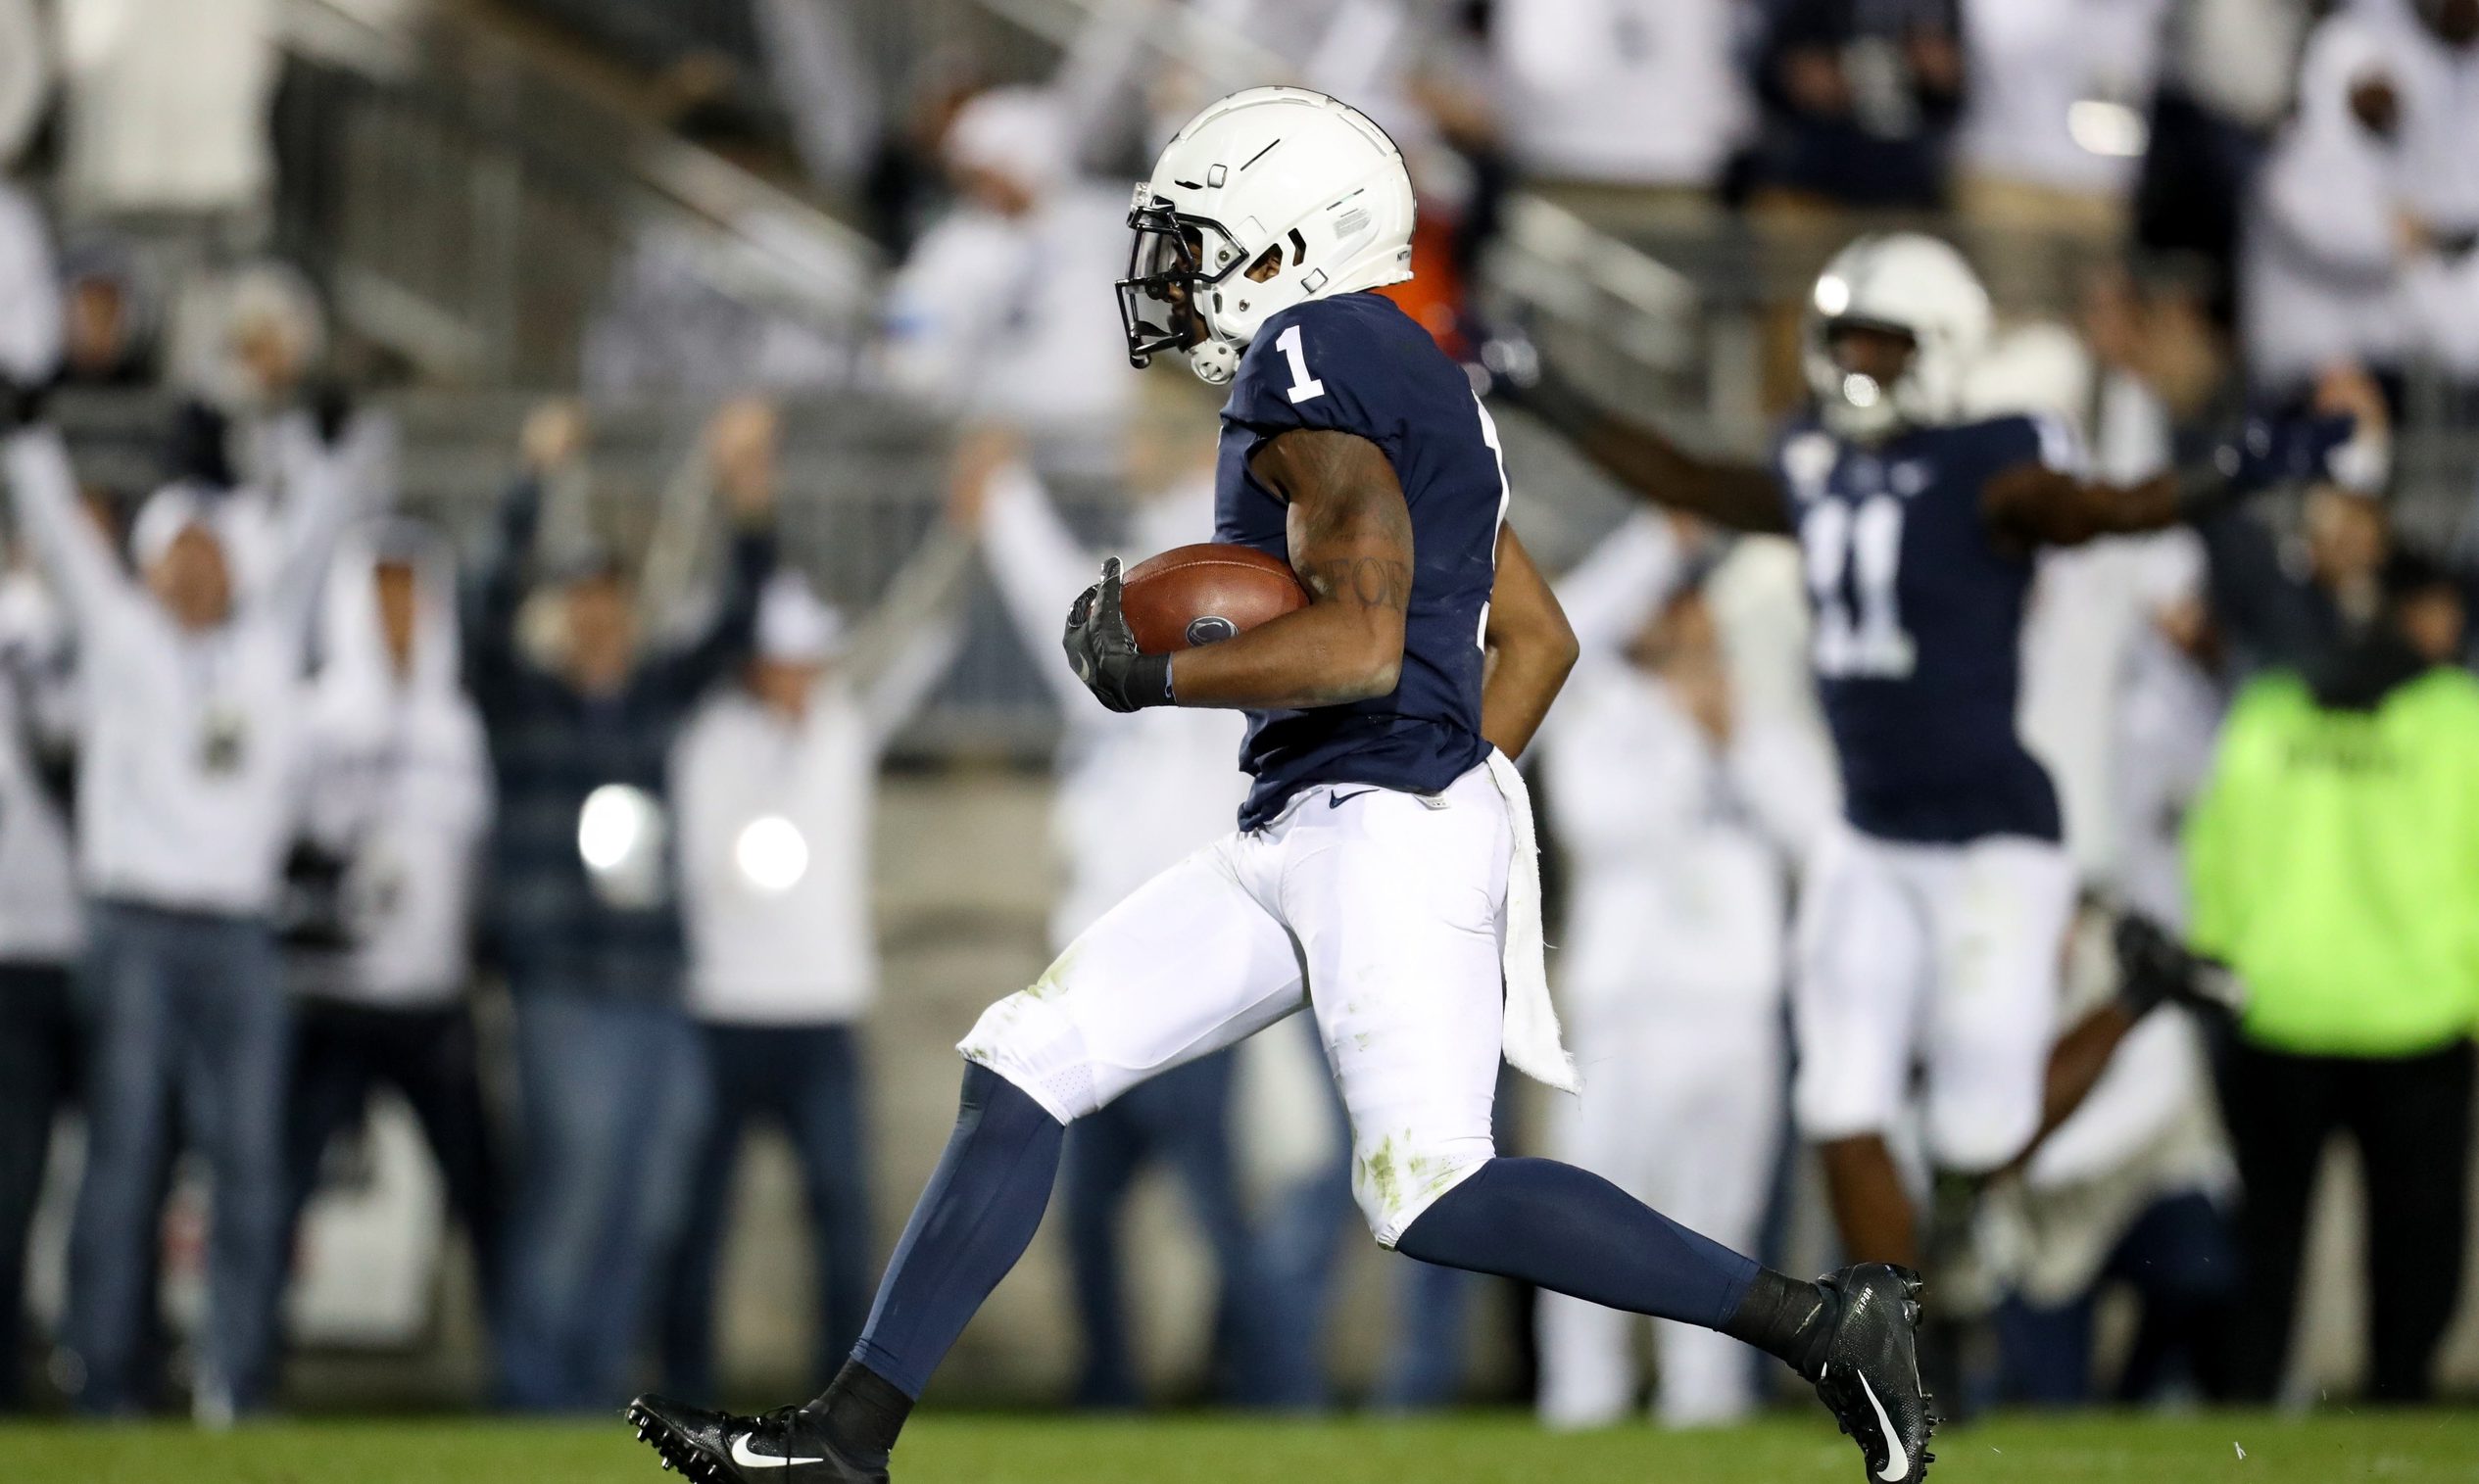 Penn State moves up to No. 6 in AP and coaches top 25